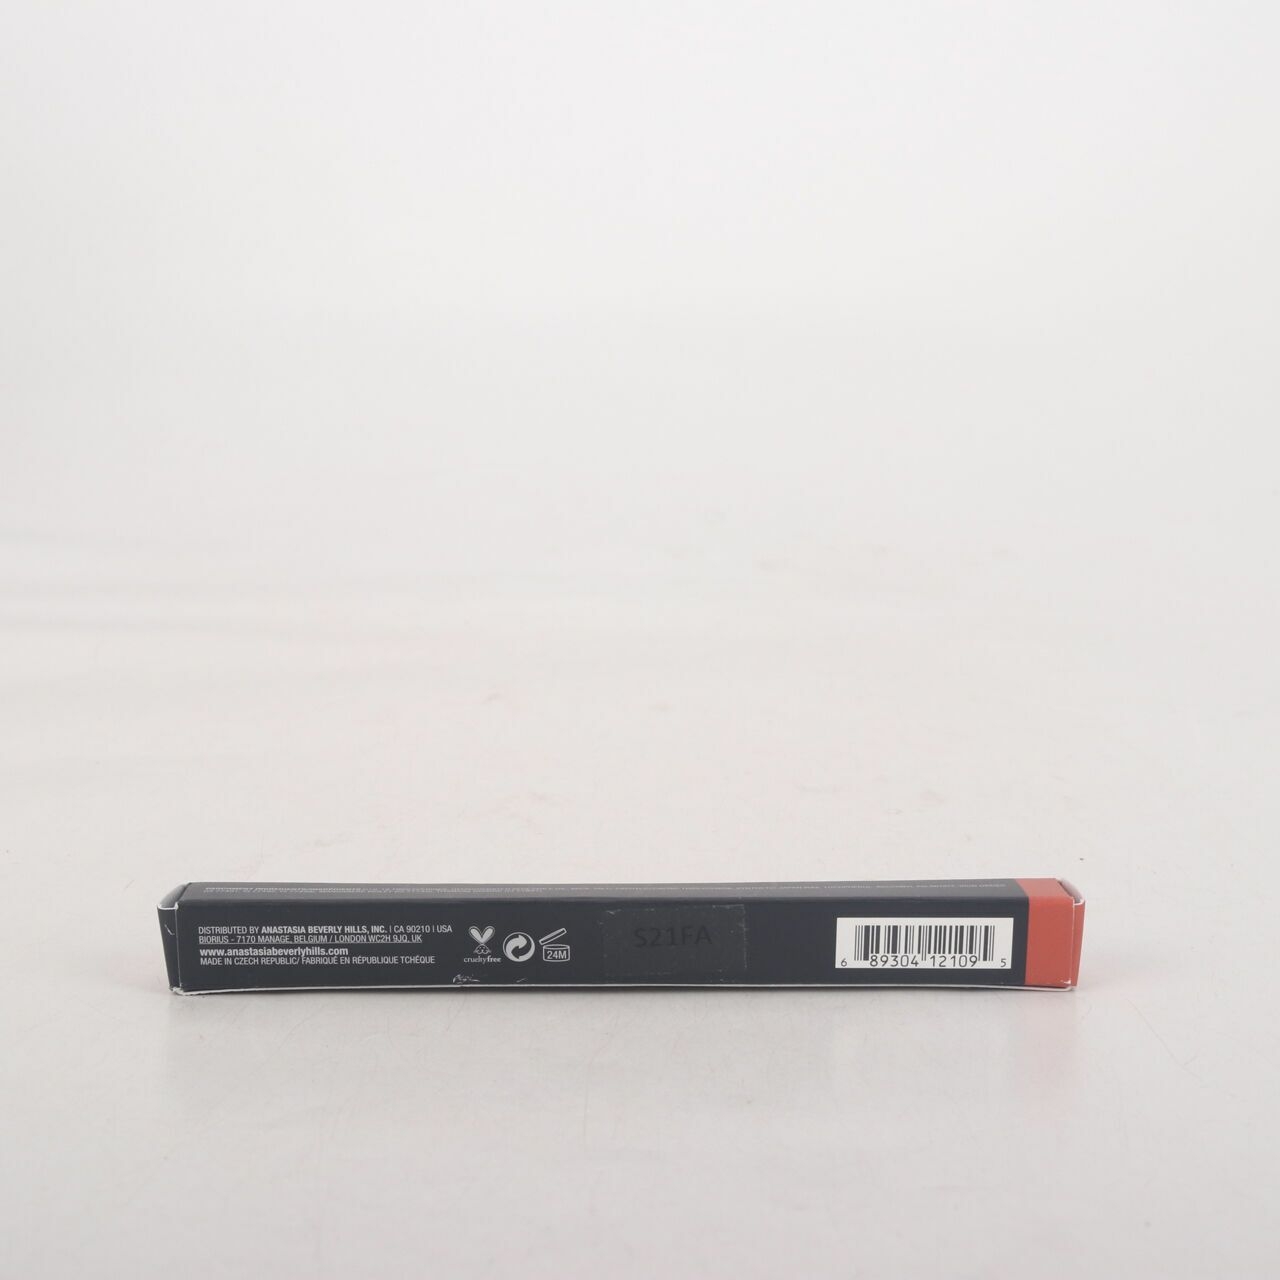 Anastasia Beverly Hills Lip Liner Parch-Ment